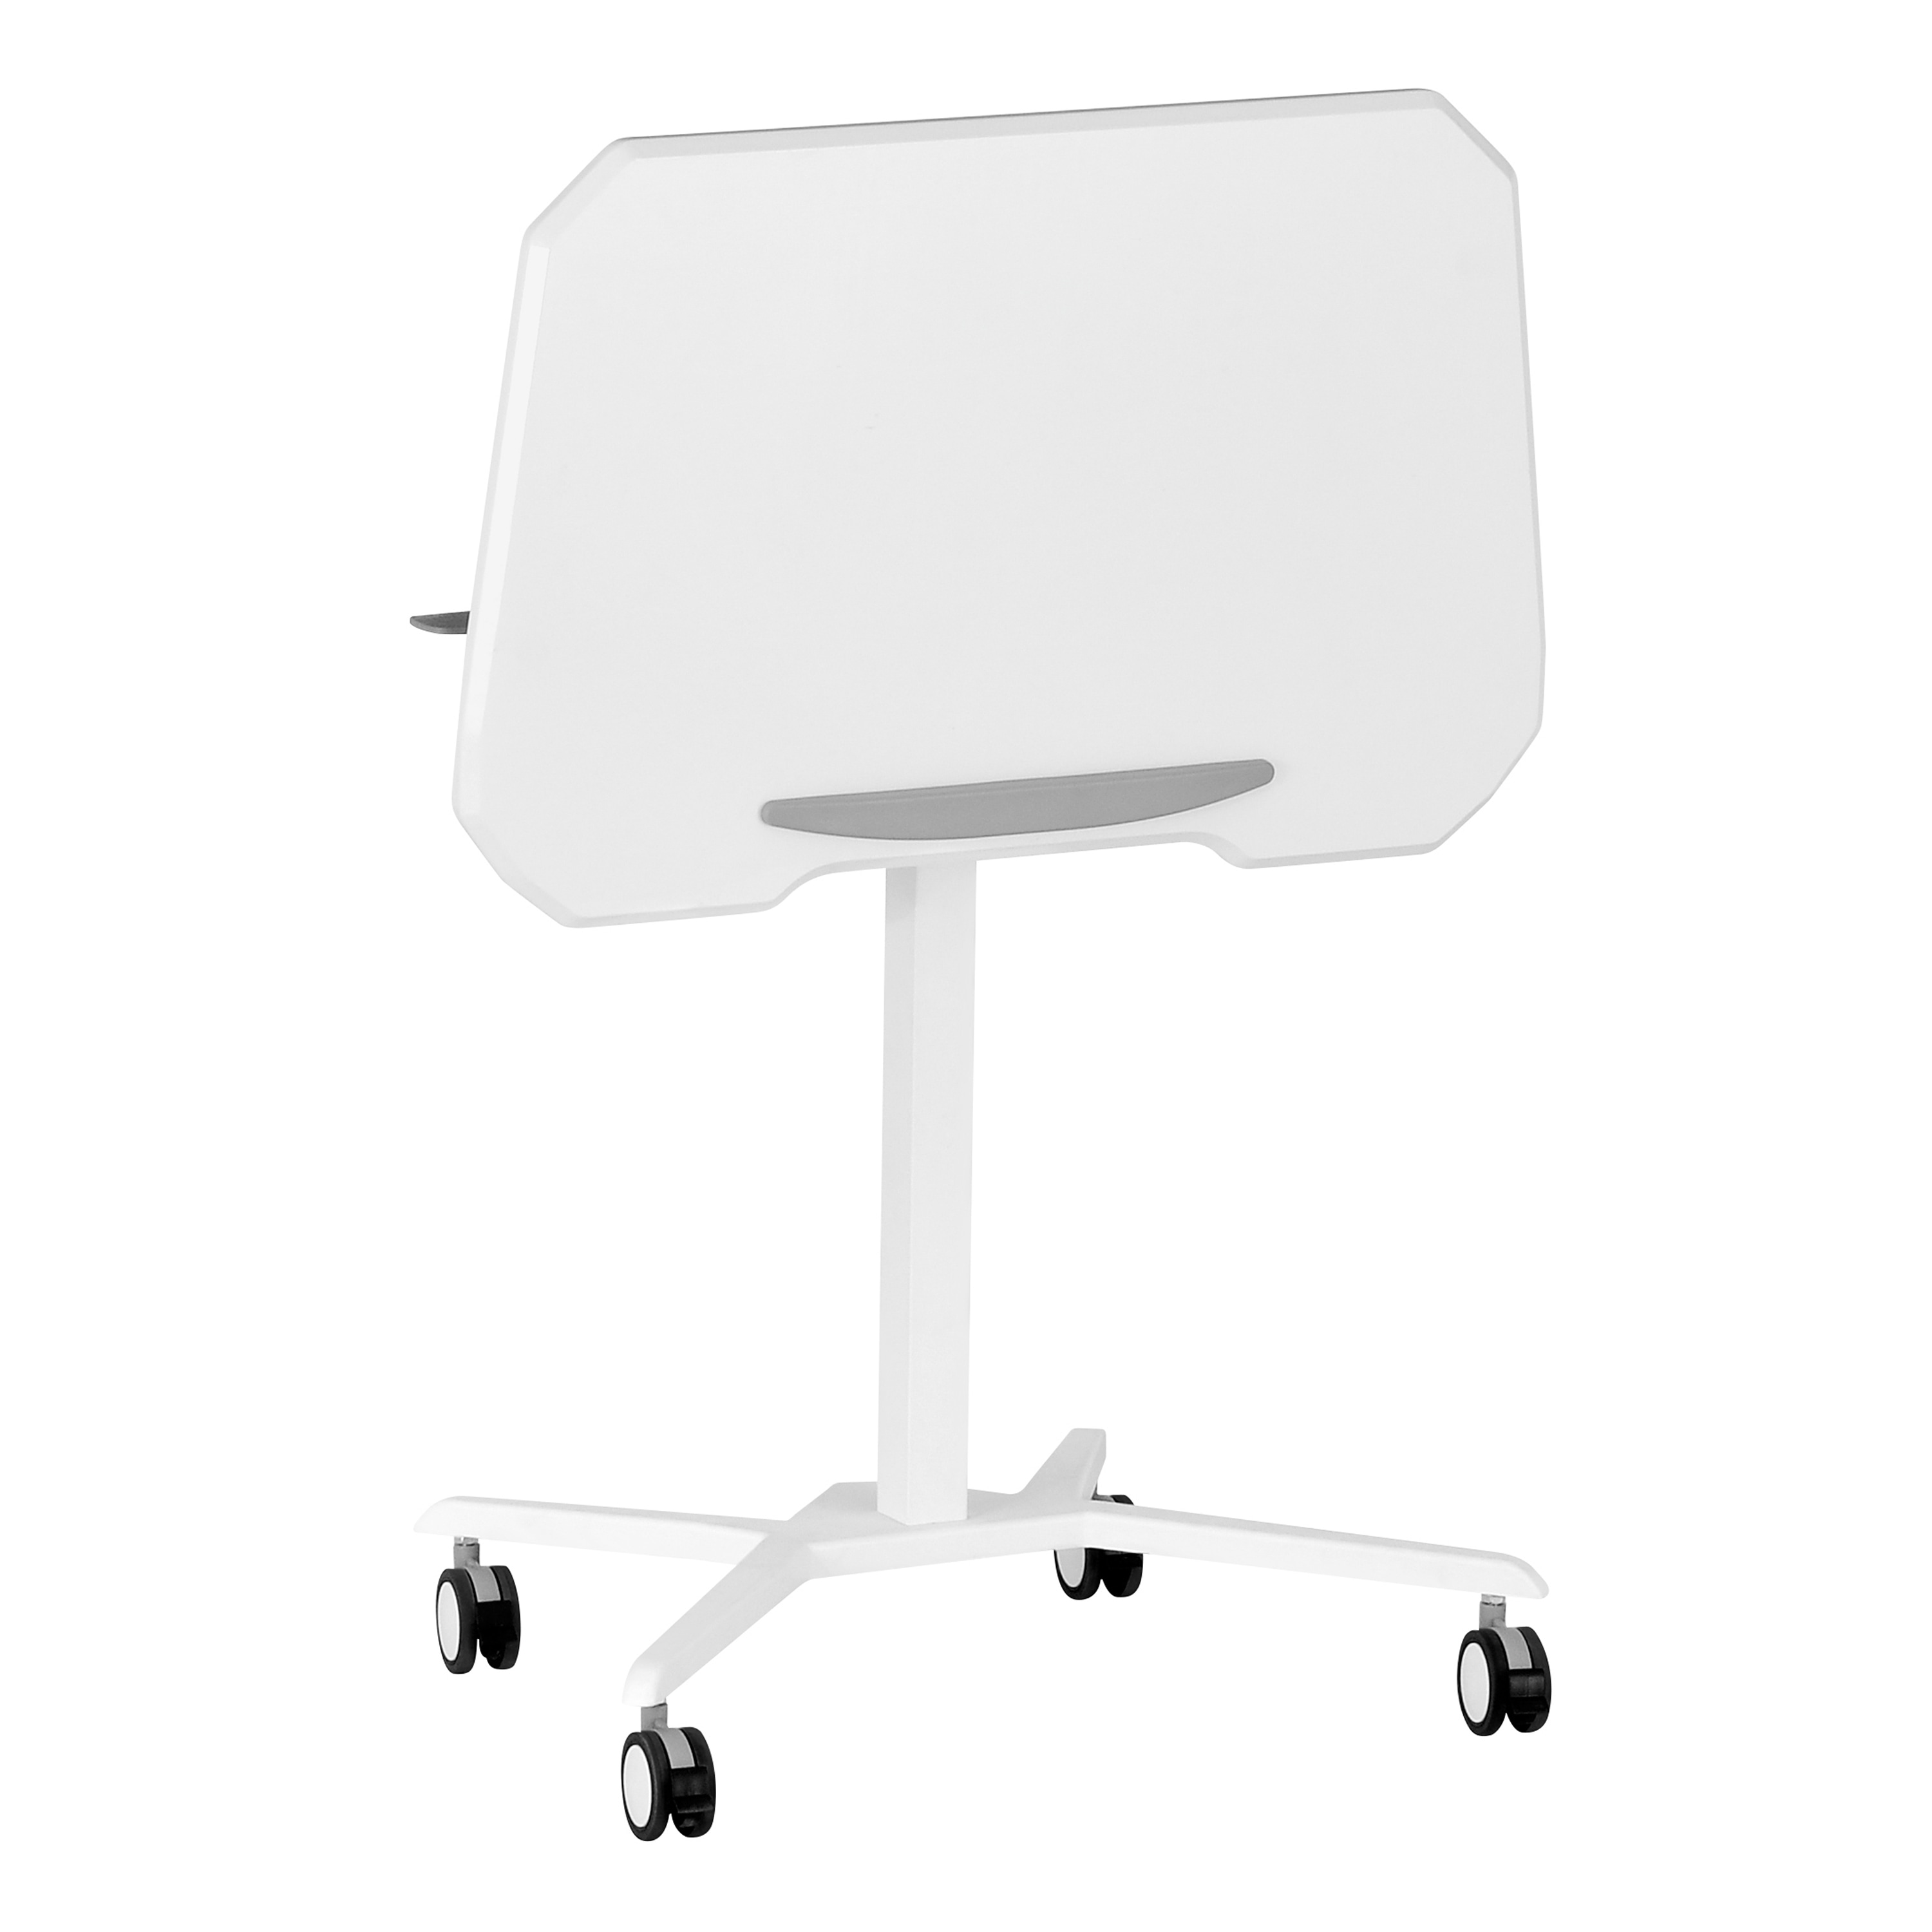 White Sit to Stand Mobile Laptop Computer Stand with Height Adjustable and Tiltable Tabletop,Easy to Assemble